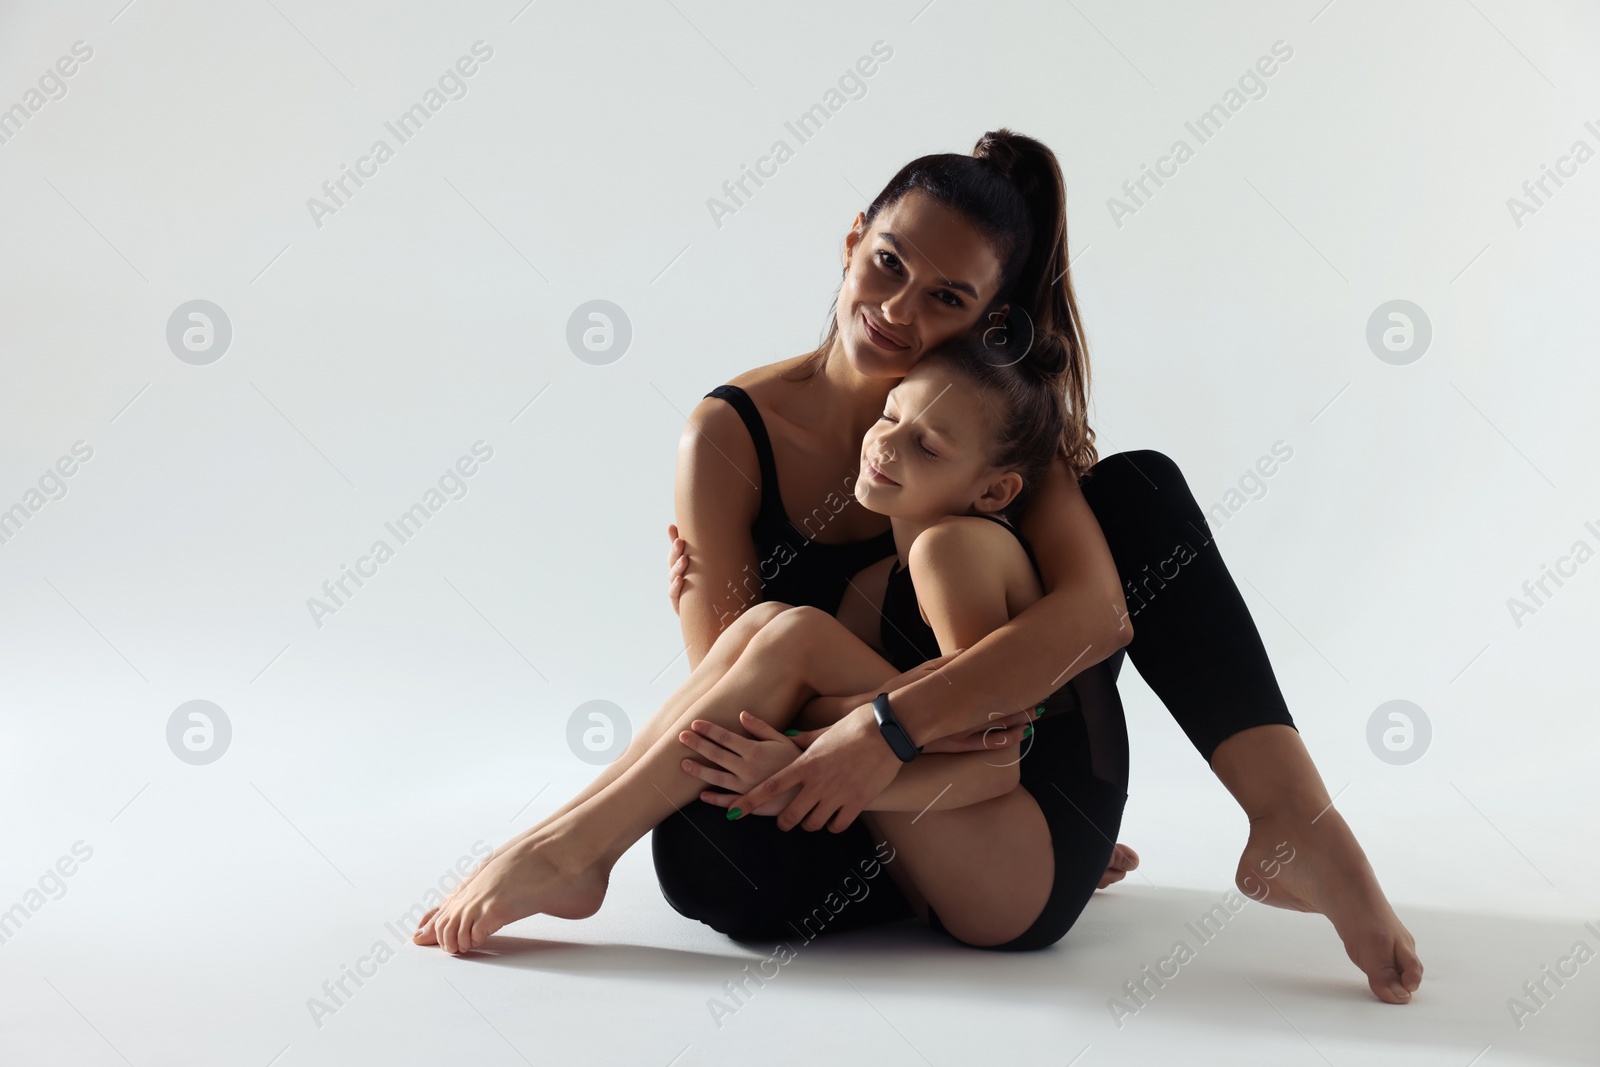 Photo of Little gymnast and her coach sitting on white background